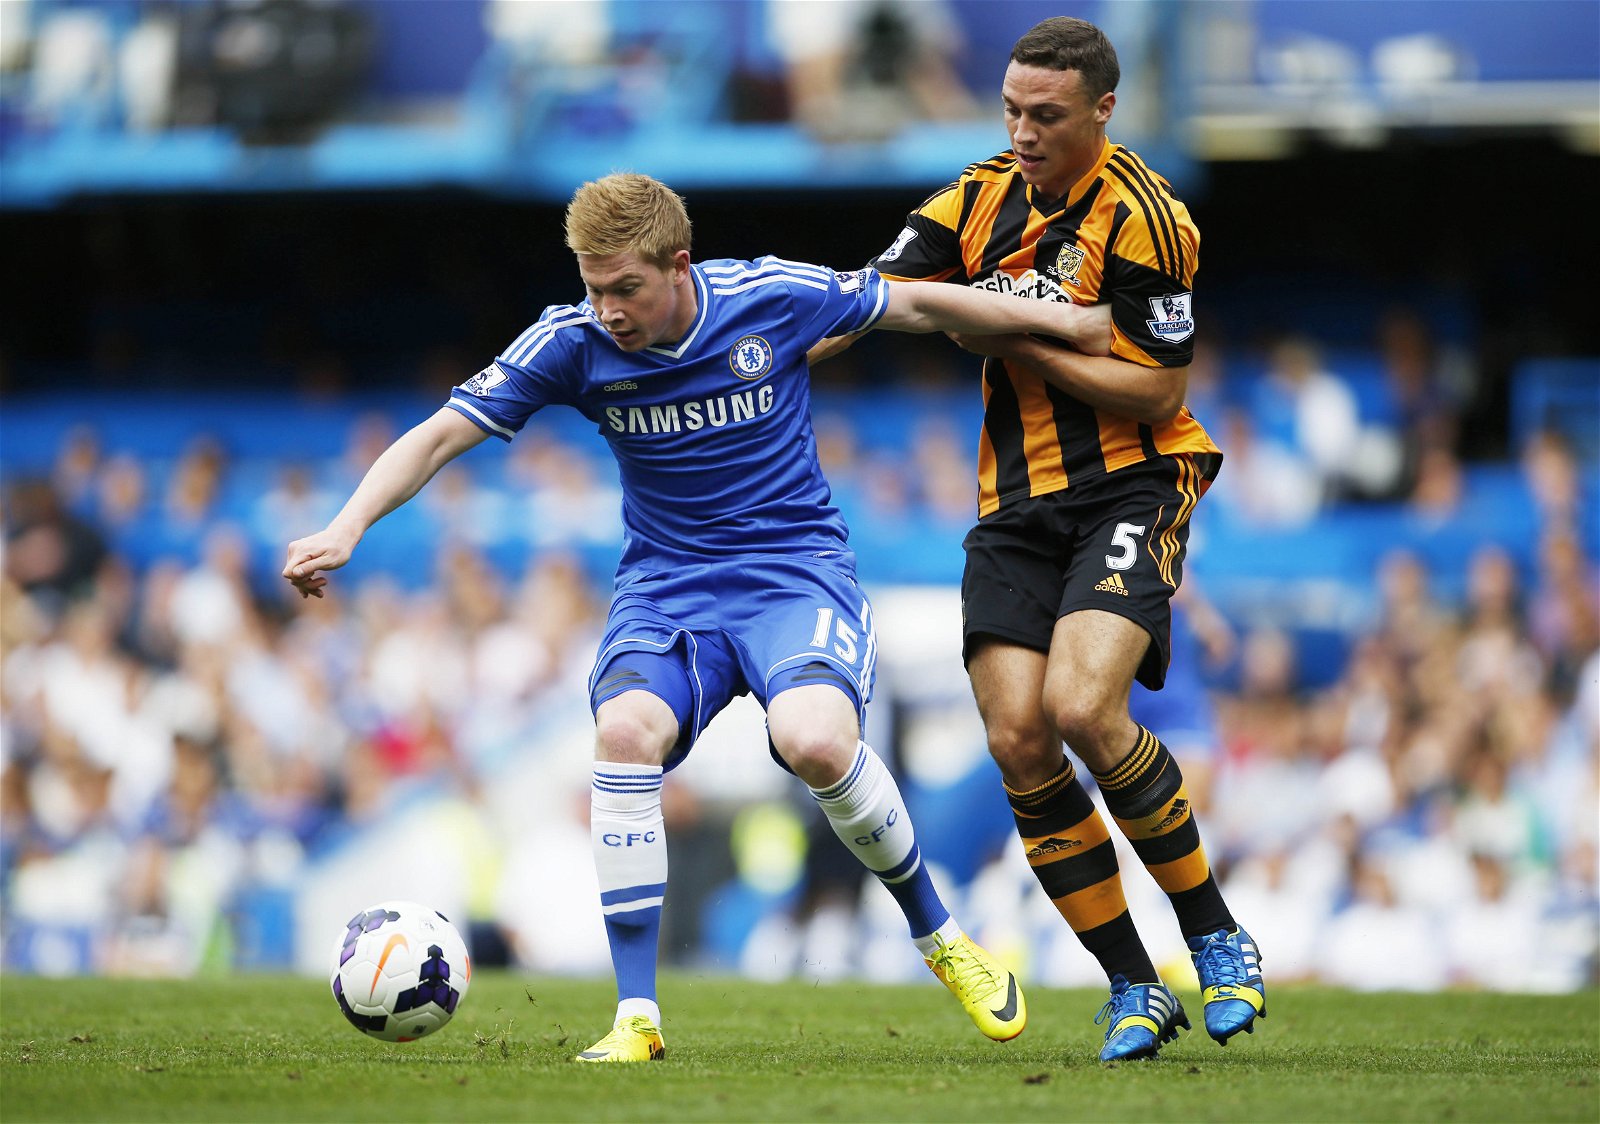 Kevin de Bruyne talks about his forgettable spell at Chelsea